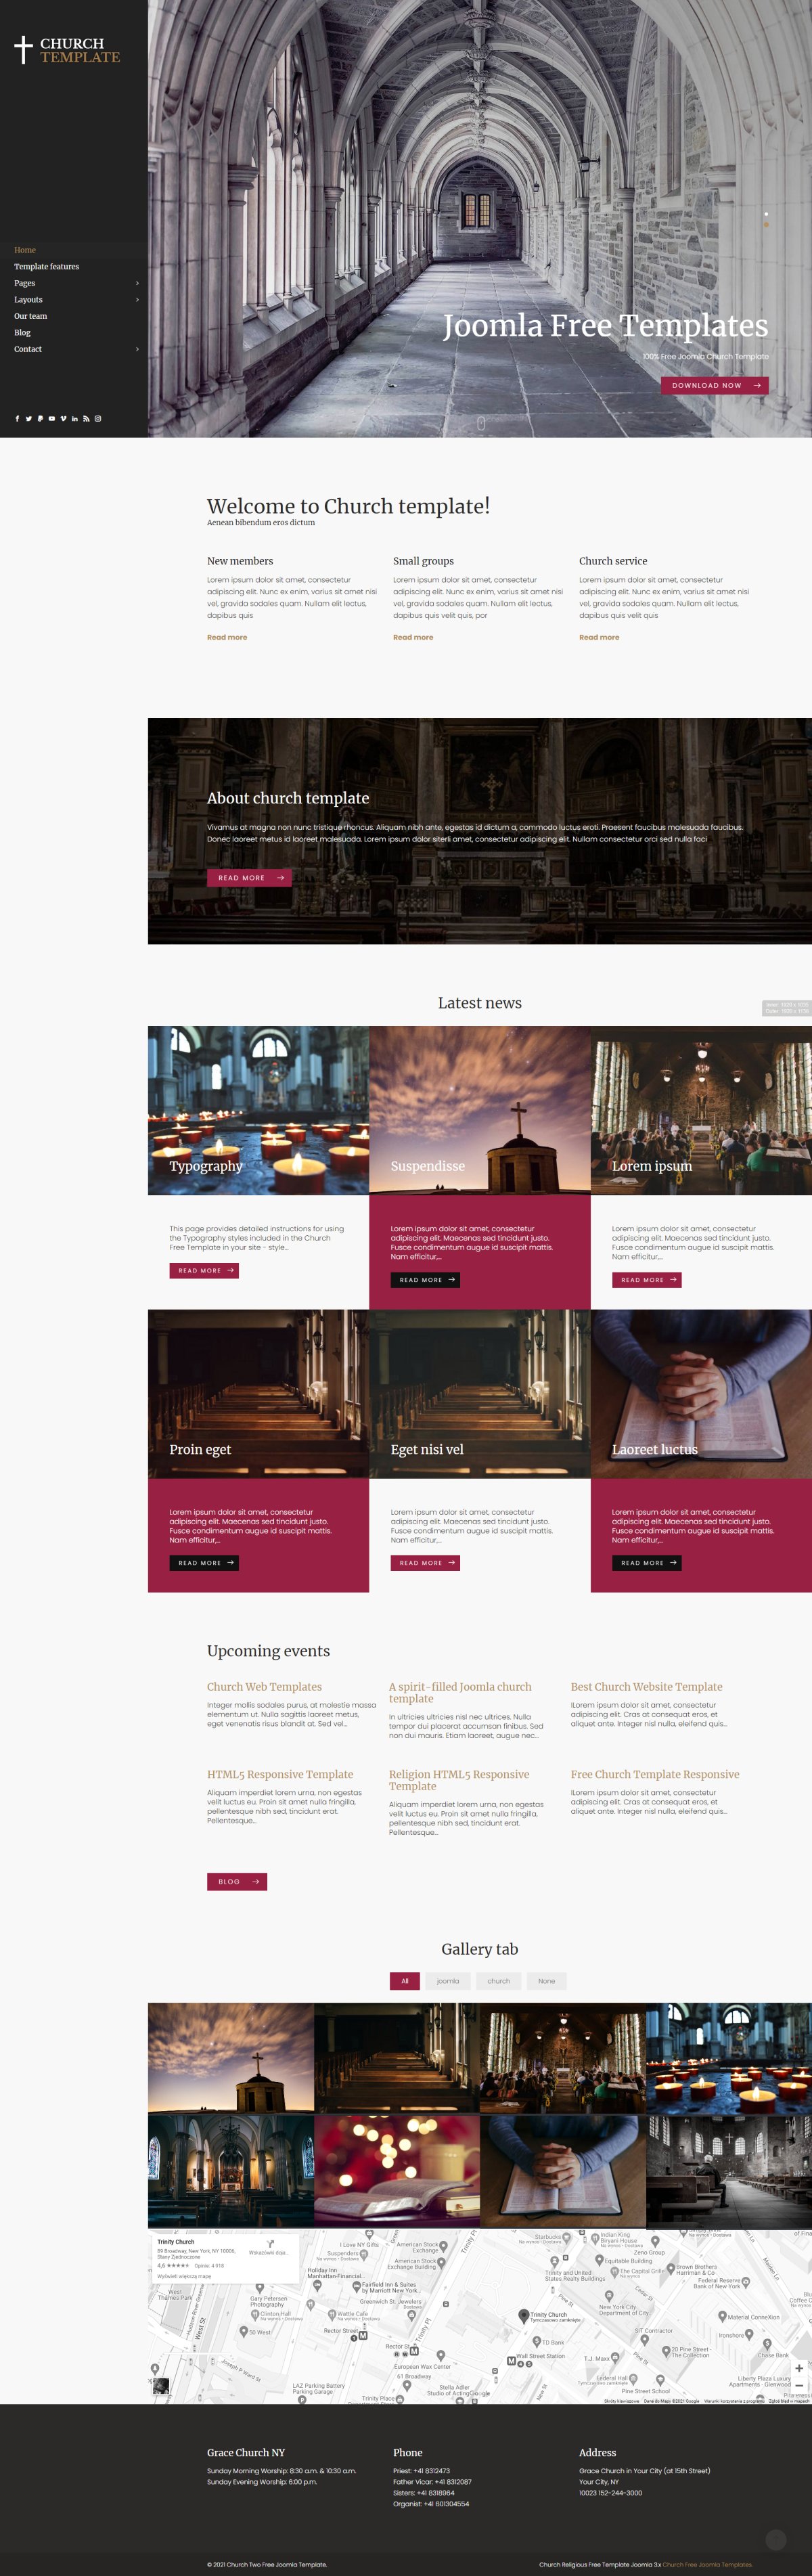 joomla3 church two template frontpage view